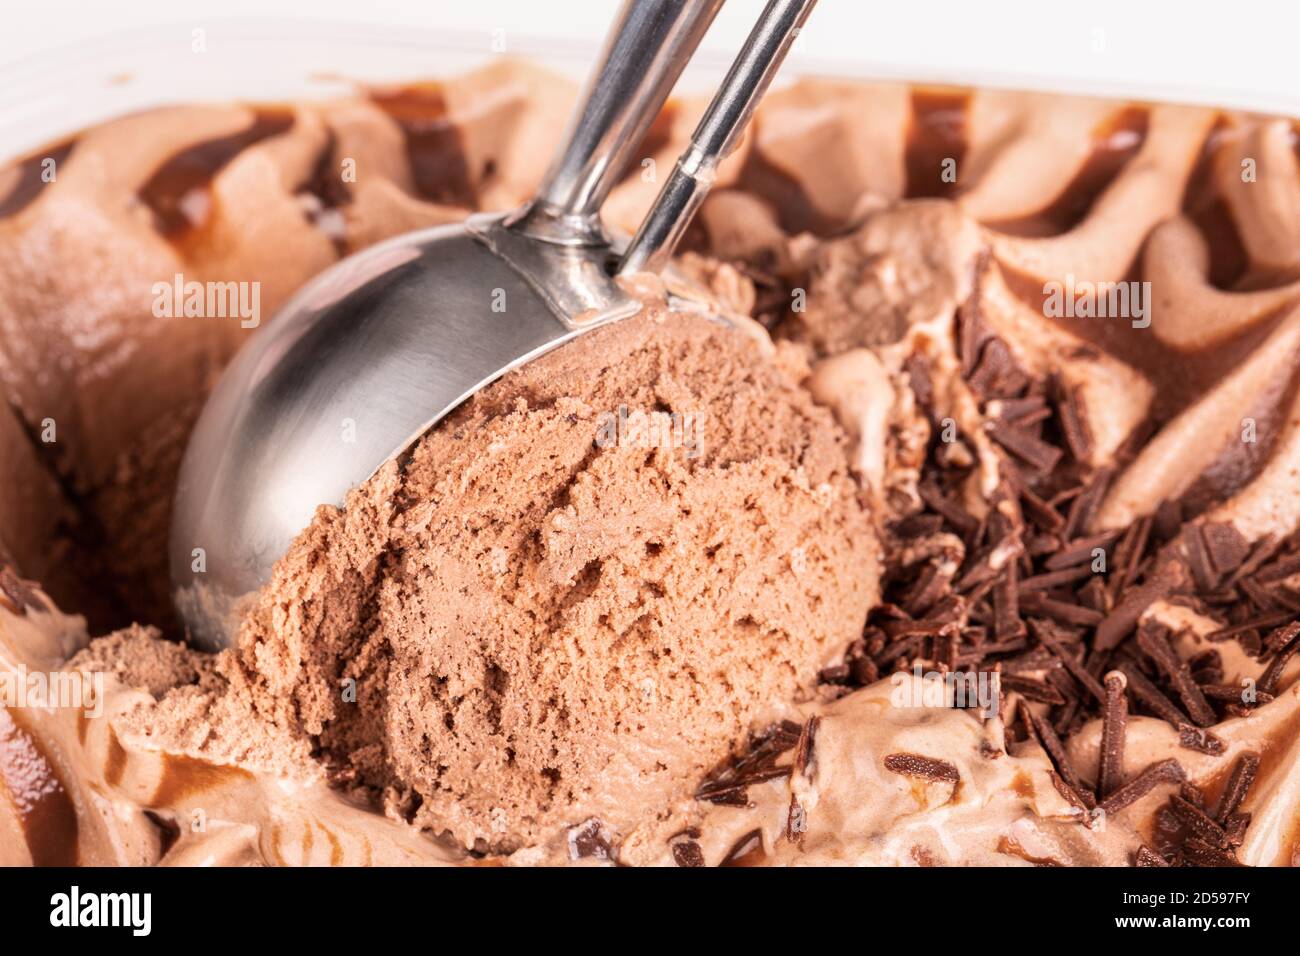 Close up of a mechanical ice cream scoop gathering up ice cream to be served. Stock Photo